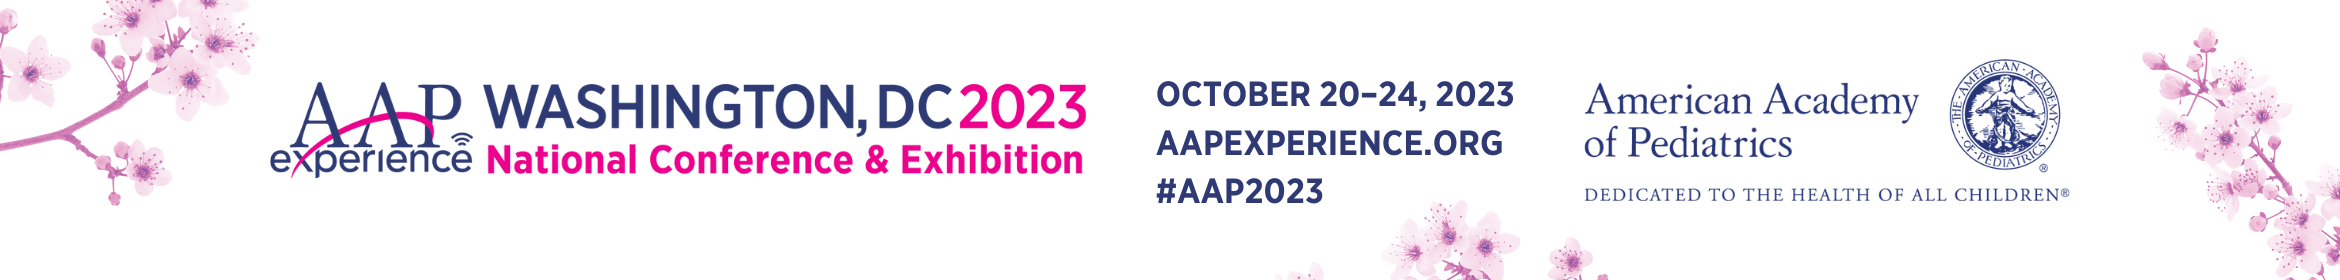 2023 AAP National Conference & Exhibition Main banner